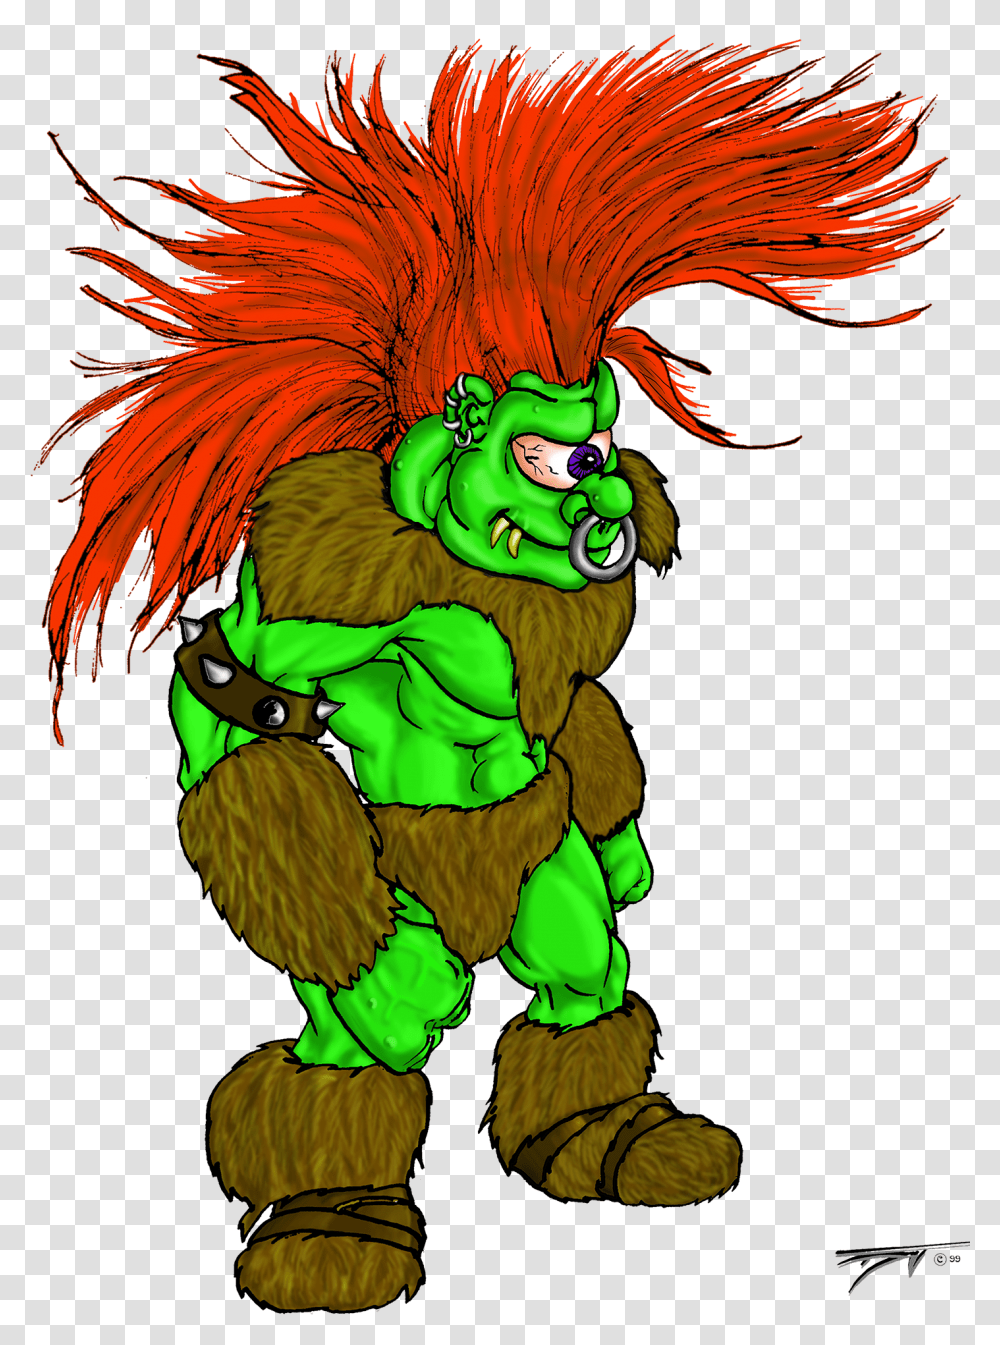 Download Crazy Hair Troll Cartoon Character With Crazy Hair, Ornament, Gemstone, Jewelry, Accessories Transparent Png